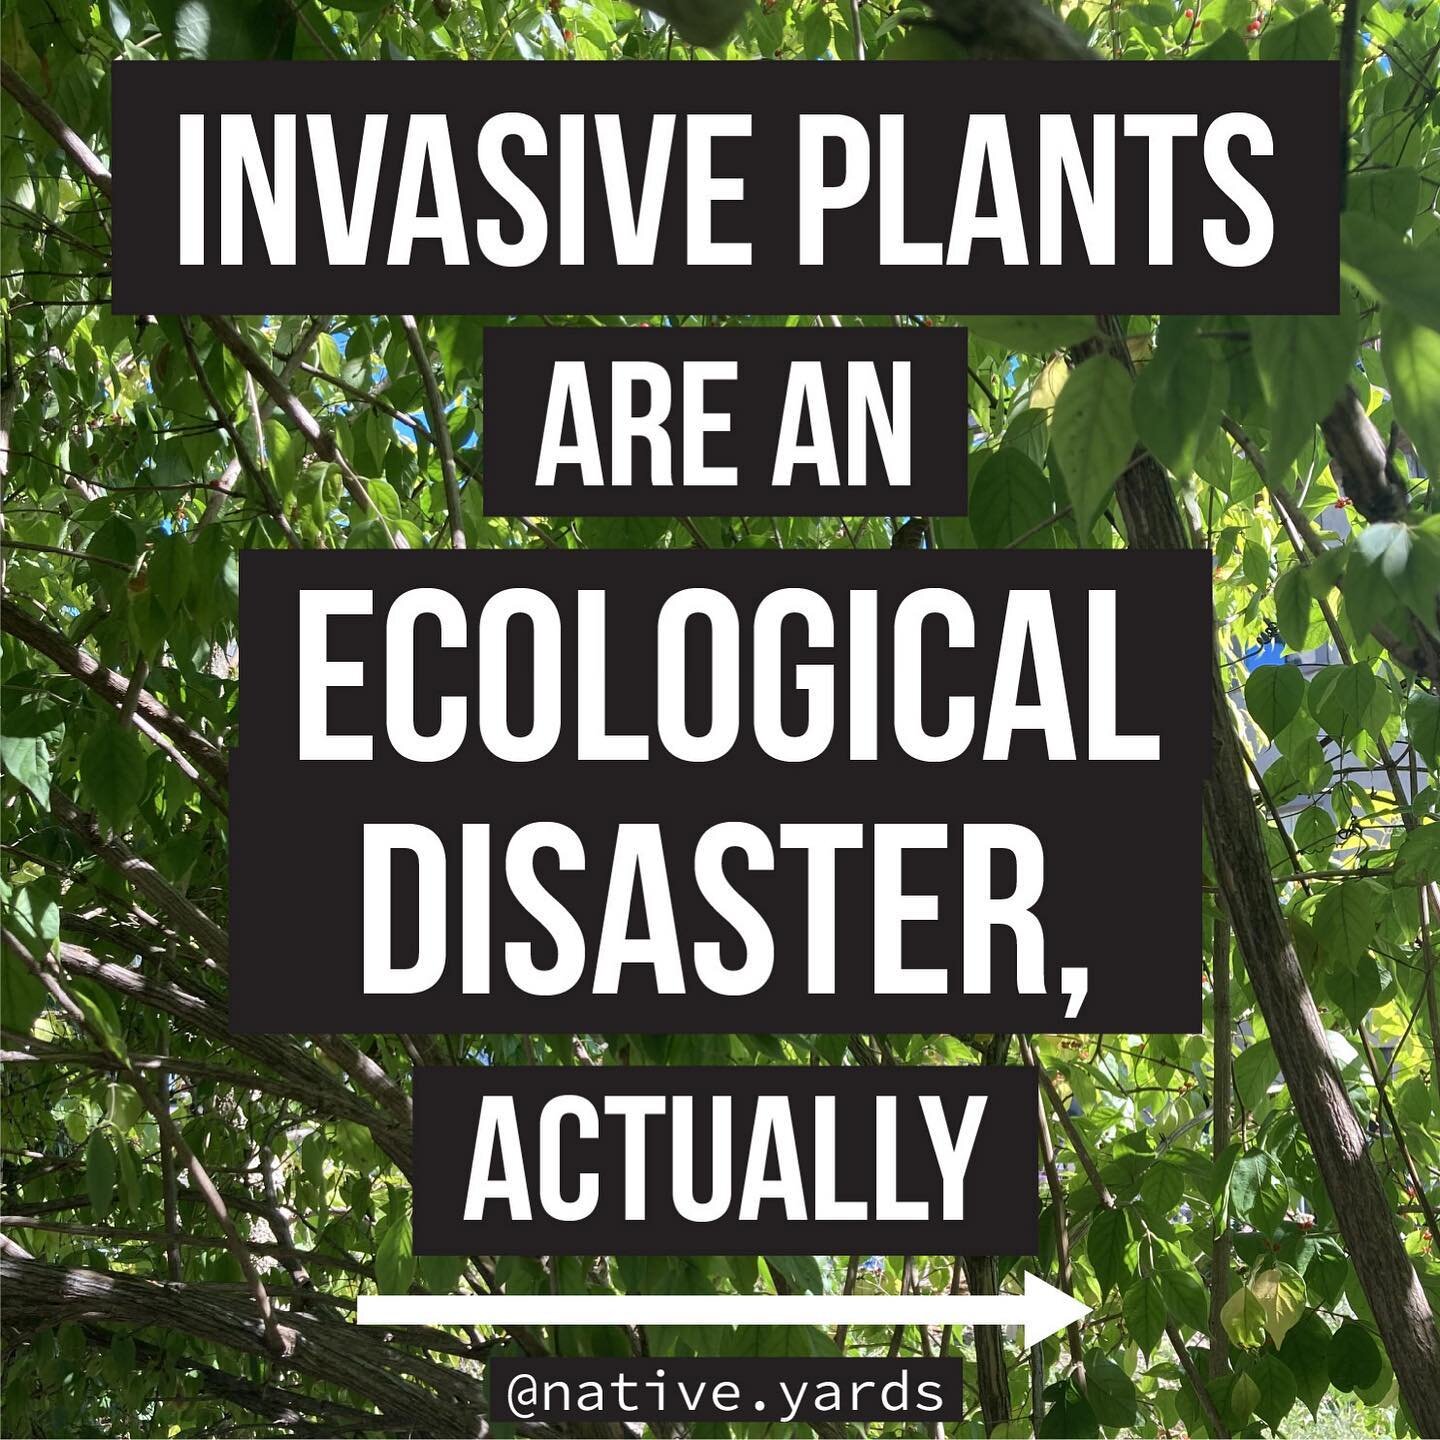 Alright y&rsquo;all, here we go.

For a while now I&rsquo;ve been seeing posts about how invasive plants are &ldquo;actually a good thing that we need to embrace&rdquo;?? 

And I saw one today that was the straw that broke the camel&rsquo;s back. I&r